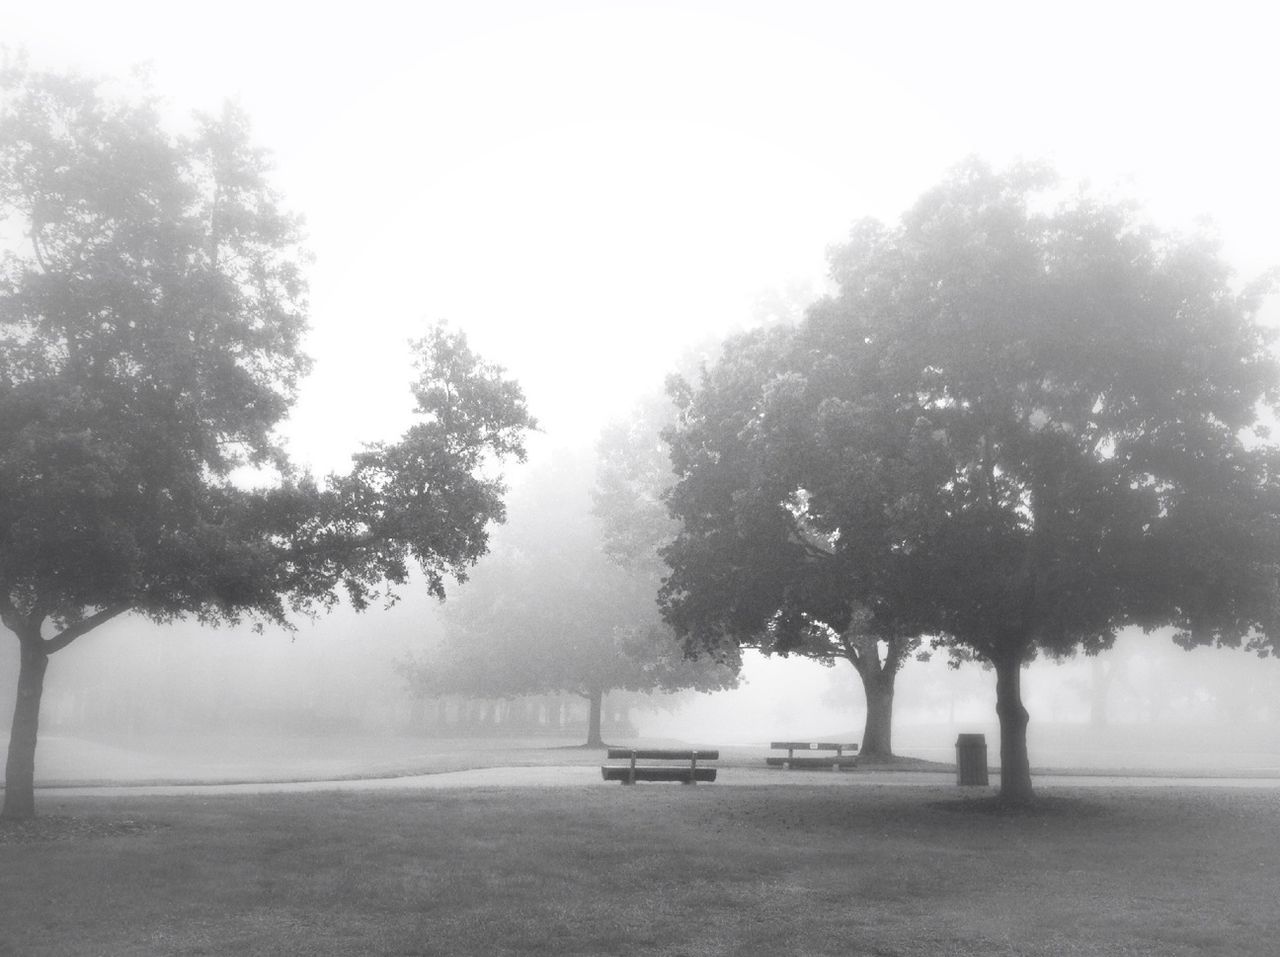 Trees and bench in park against sky during foggy weather